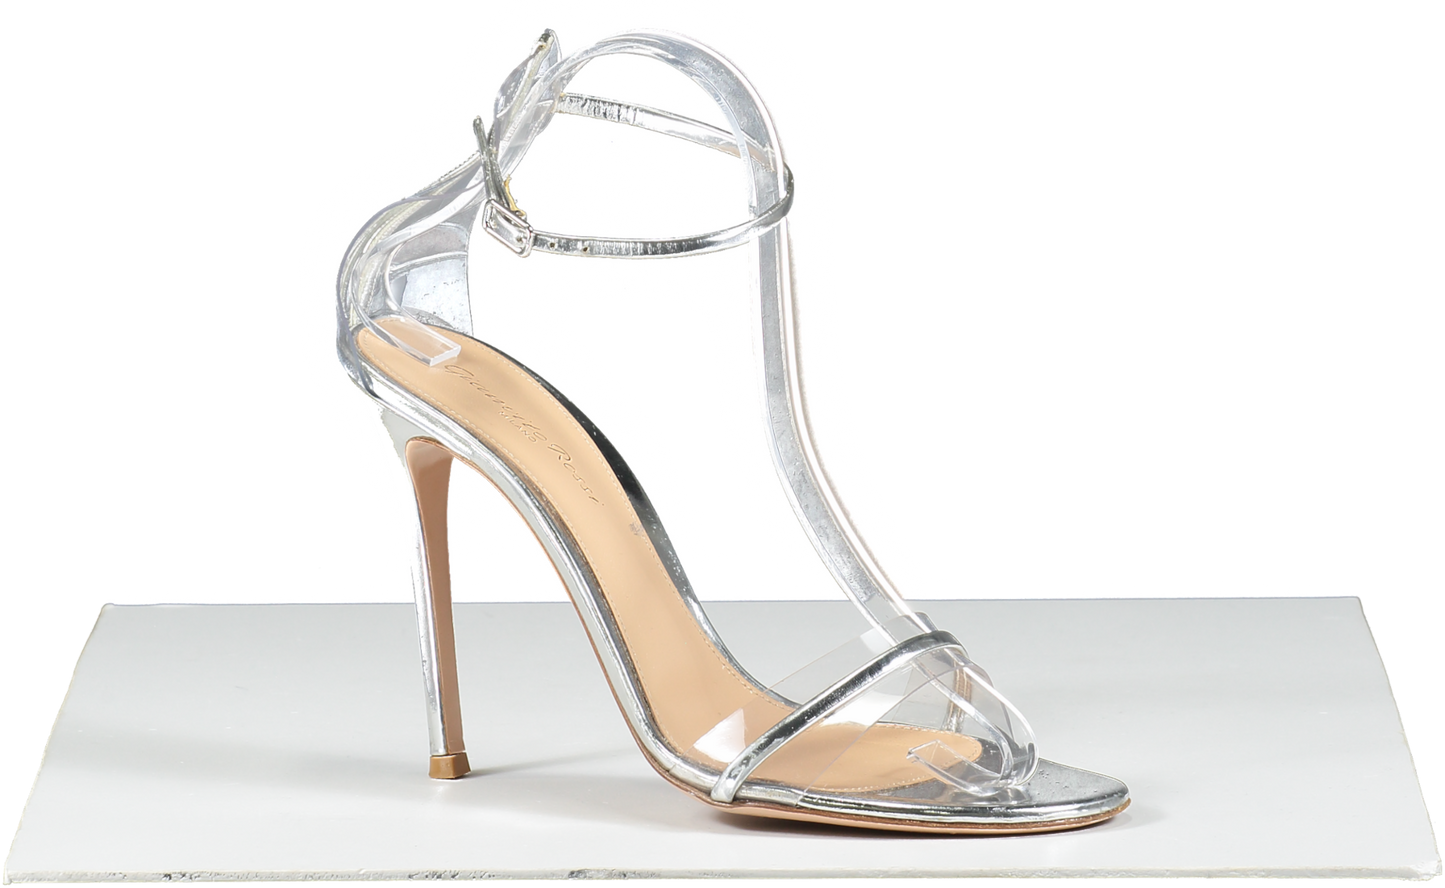 Gianvito Rossi Metallic Silver Leather And Pvc Heeled Sandals UK 6 EU 39 👠